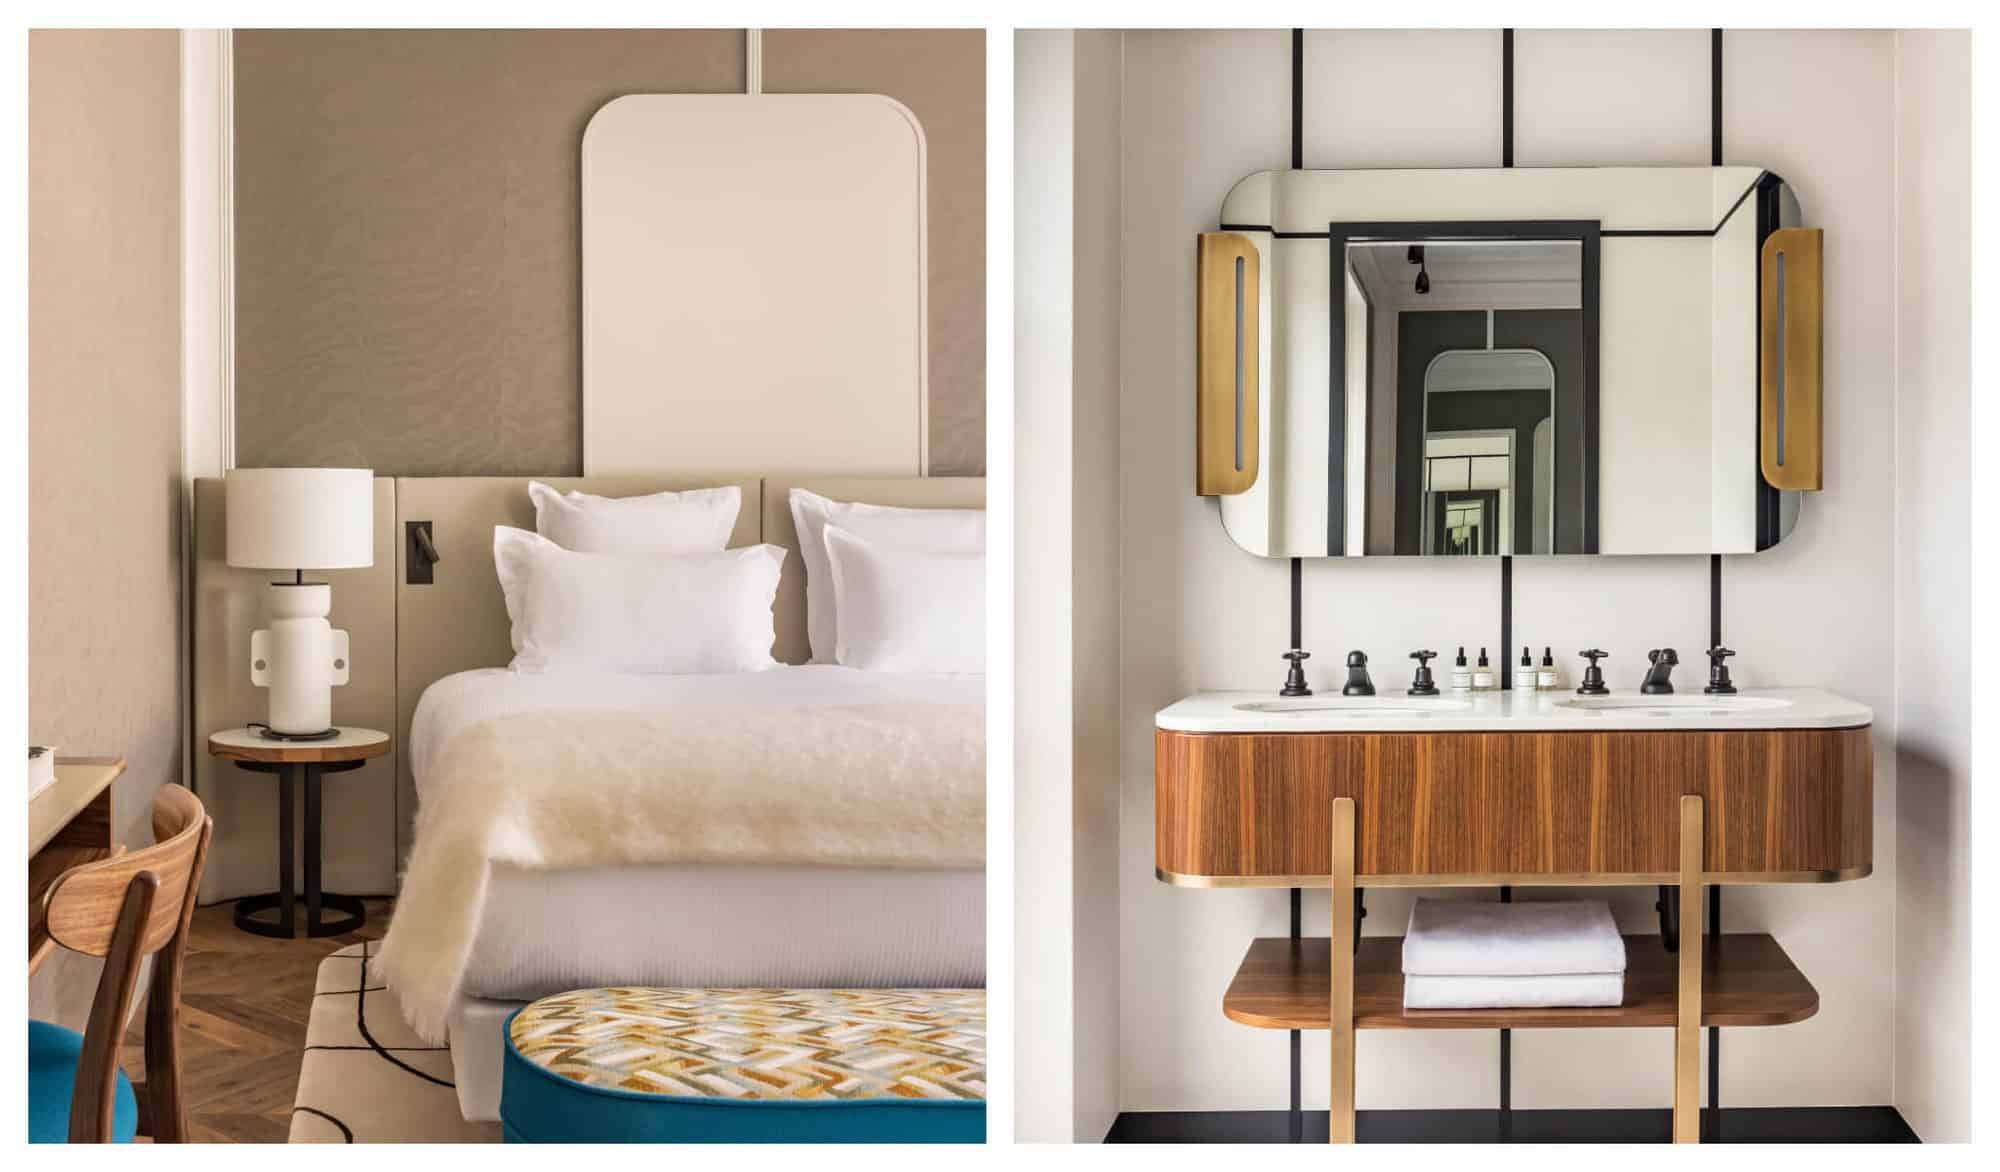 Left: A bedroom with white pillows, cream-colored walls at the Pavillon Faubourg Saint-Germain, and a white bedside lamp. Right: A bathroom sink with a large rectangle mirror held by two bronze plates in one of the luxury rooms at Paris's Pavillon Faubourg Saint-Germain.